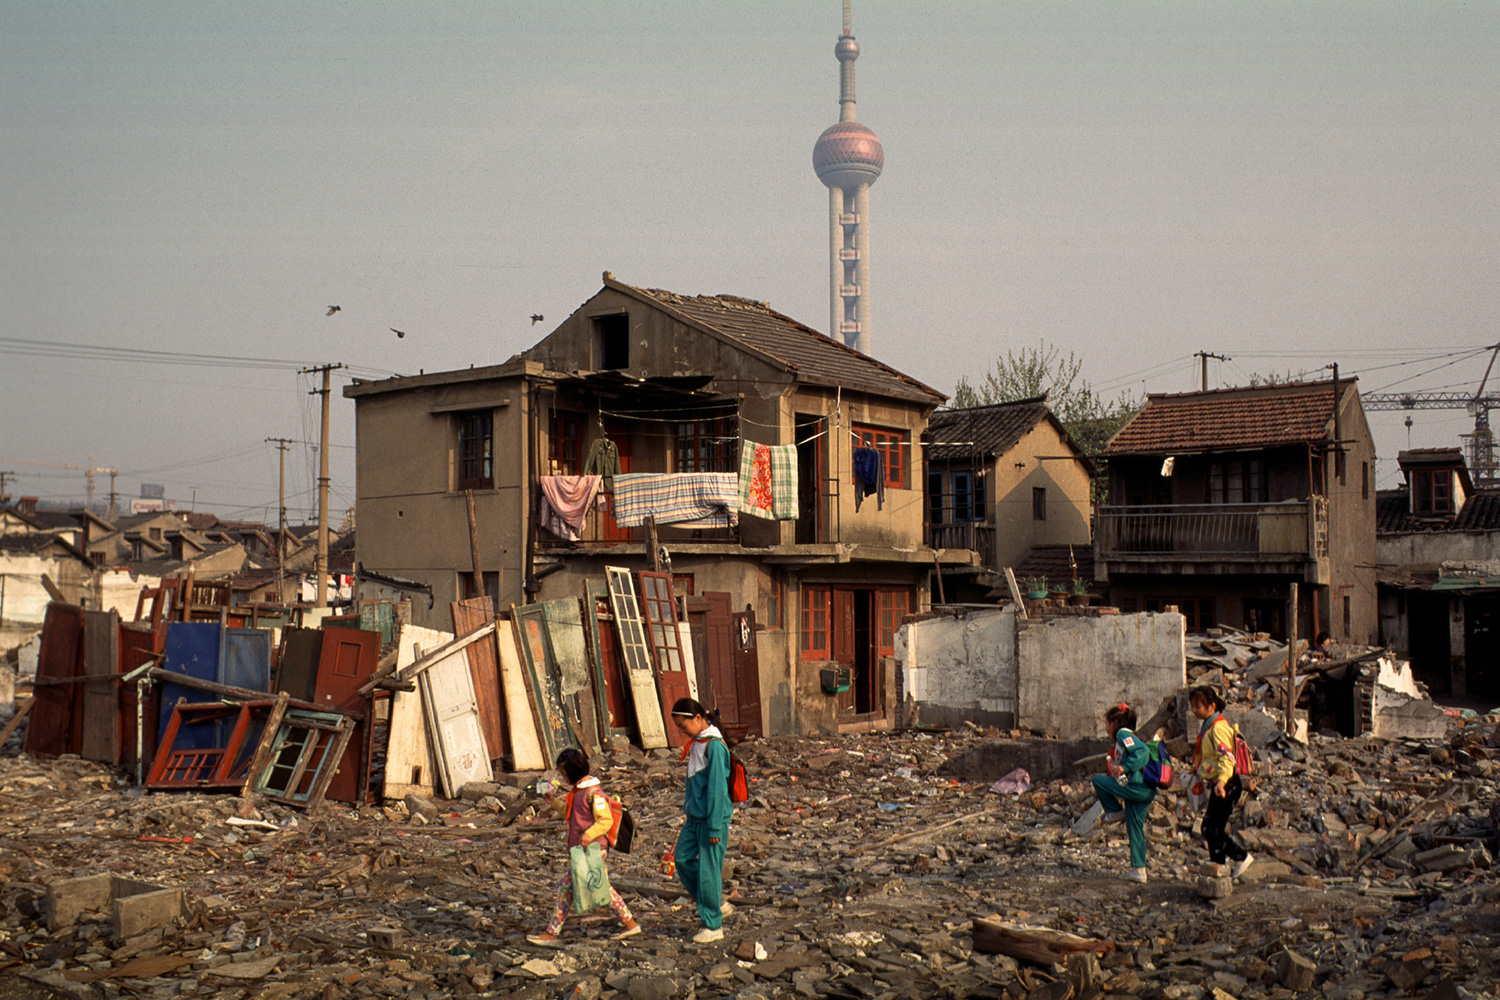 On their way to school, children pass through the rubble of demolished homes in their neighborhood in Lujiazui, 1996.